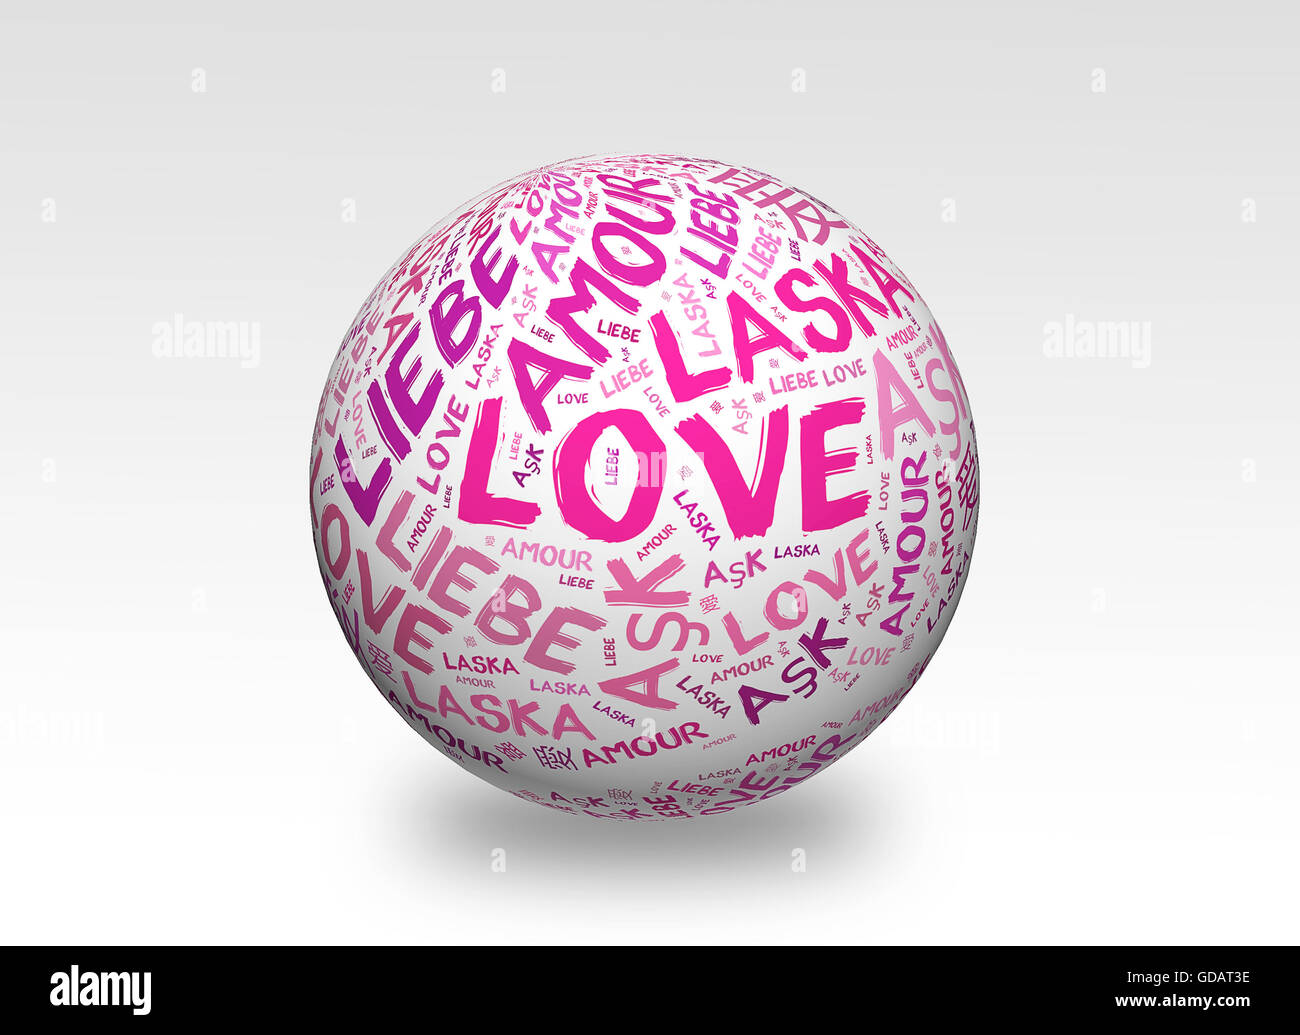 Love concept word cloud in many languages of the world Stock Photo